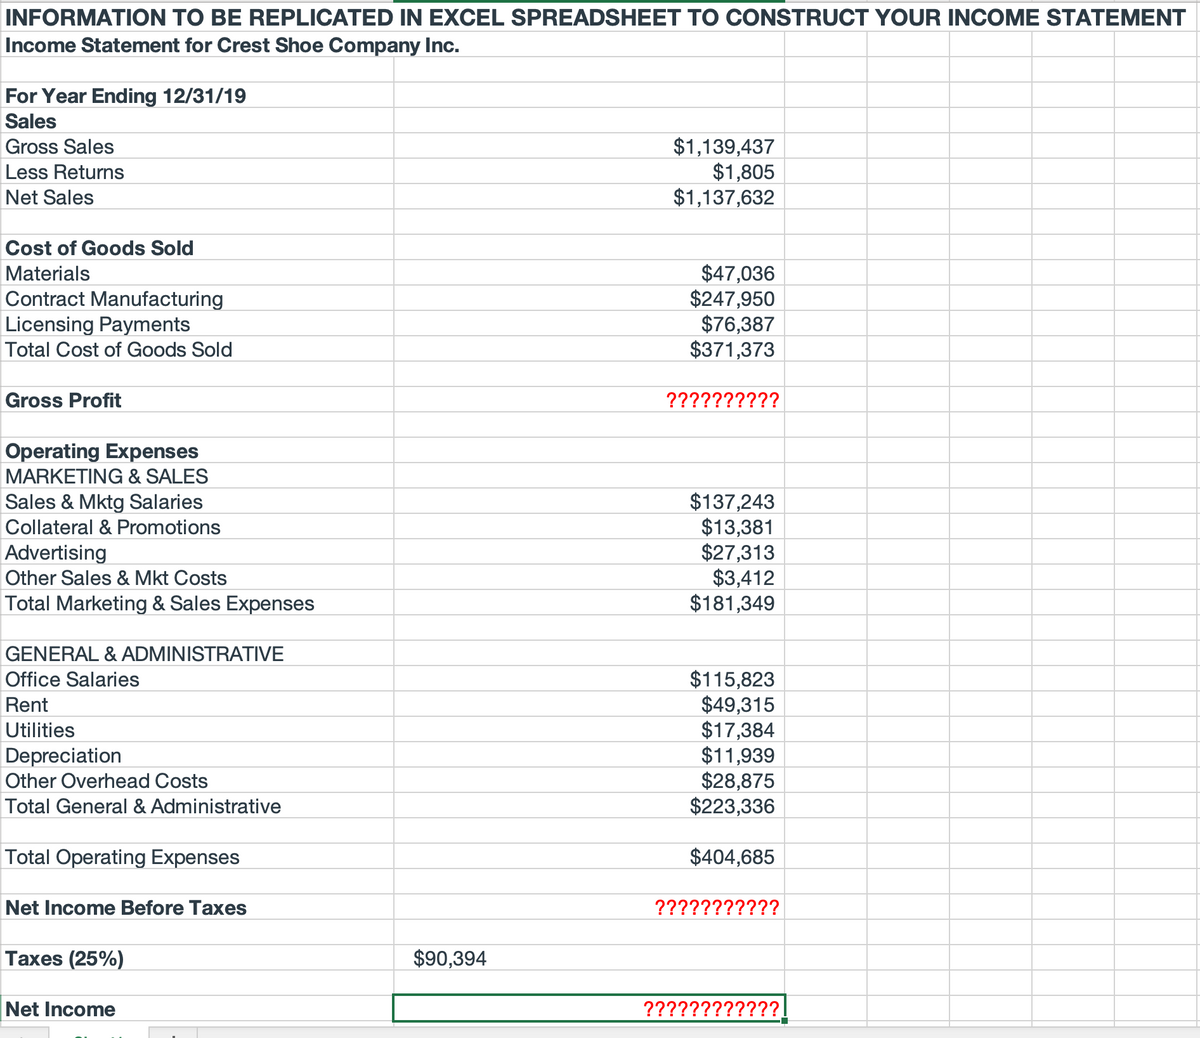 INFORMATION TO BE REPLICATED IN EXCEL SPREADSHEET TO CONSTRUCT YOUR INCOME STATEMENT
Income Statement for Crest Shoe Company Inc.
For Year Ending 12/31/19
Sales
$1,139,437
$1,805
$1,137,632
Gross Sales
Less Returns
Net Sales
Cost of Goods Sold
$47,036
$247,950
$76,387
$371,373
Materials
Contract Manufacturing
Licensing Payments
Total Cost of Goods Sold
Gross Profit
??????????
Operating Expenses
MARKETING & SALES
Sales & Mktg Salaries
$137,243
$13,381
$27,313
$3,412
$181,349
Collateral & Promotions
Advertising
Other Sales & Mkt Costs
Total Marketing & Sales Expenses
GENERAL & ADMINISTRATIVE
$115,823
$49,315
$17,384
$11,939
$28,875
$223,336
Office Salaries
Rent
Utilities
Depreciation
Other Overhead Costs
Total General & Administrative
Total Operating Expenses
$404,685
Net Income Before Taxes
???????????
Taxes (25%)
$90,394
Net Income
????????????
